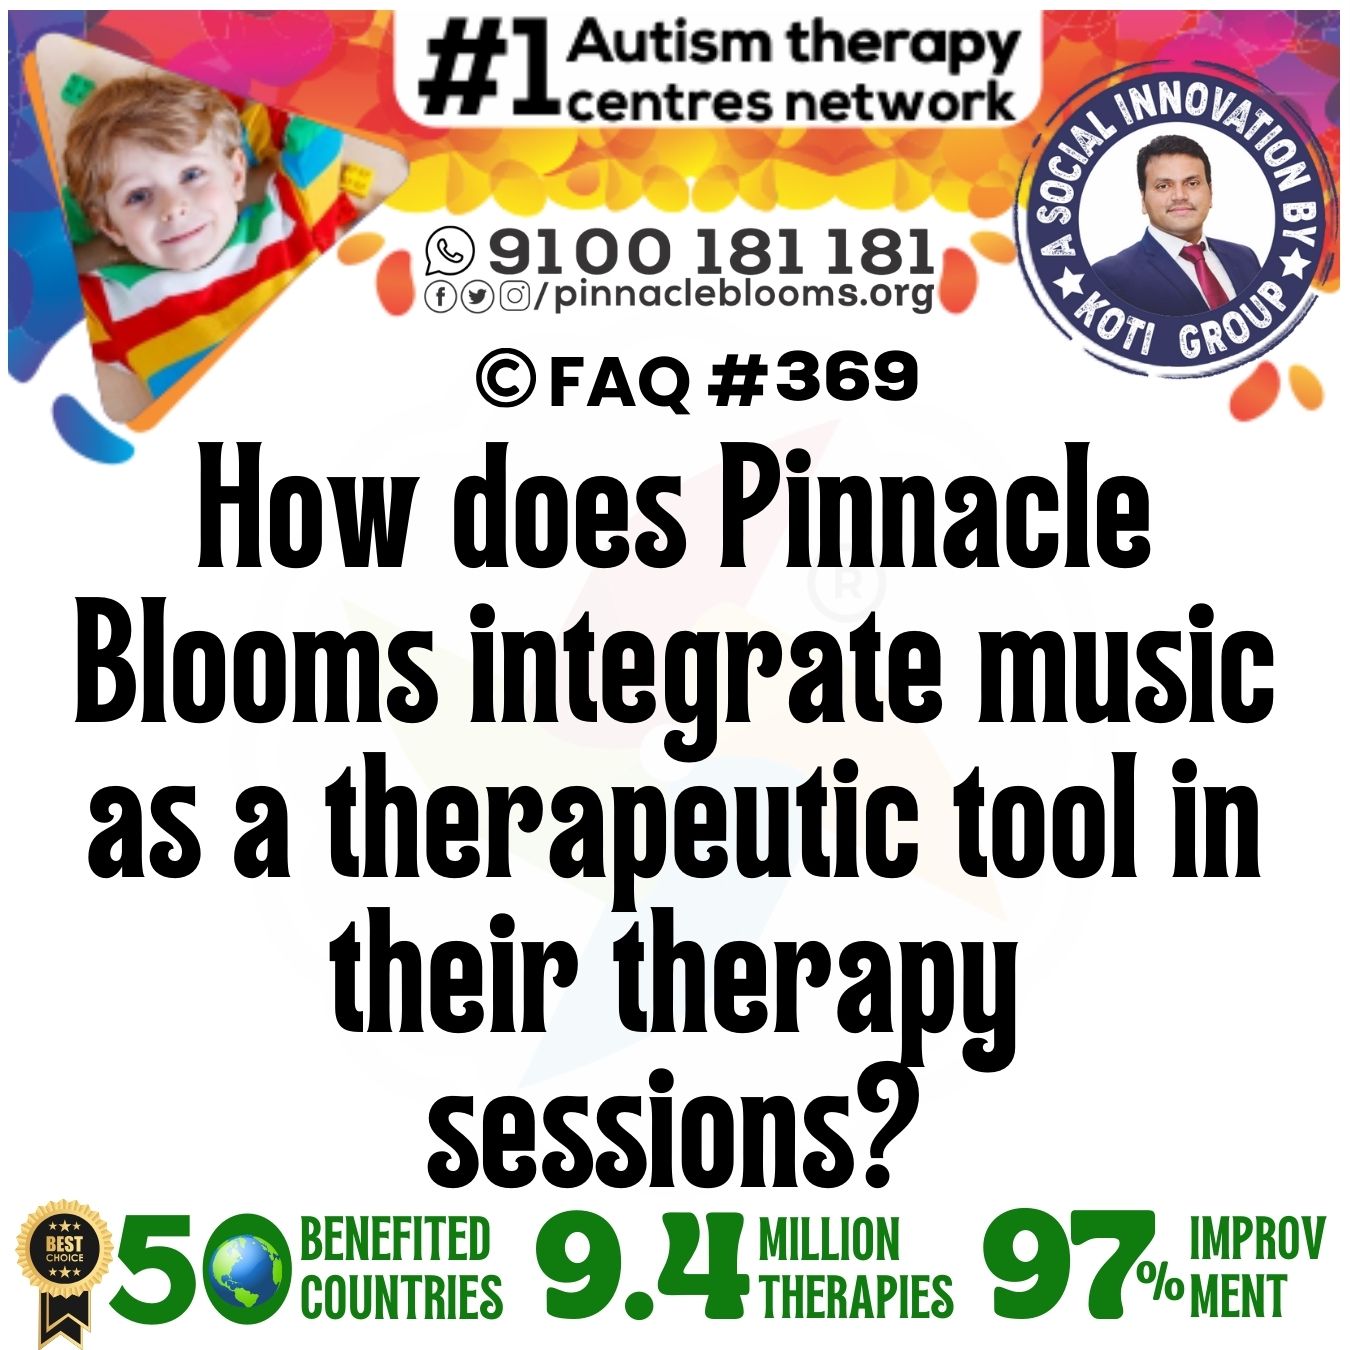 How does Pinnacle Blooms integrate music as a therapeutic tool in their therapy sessions?